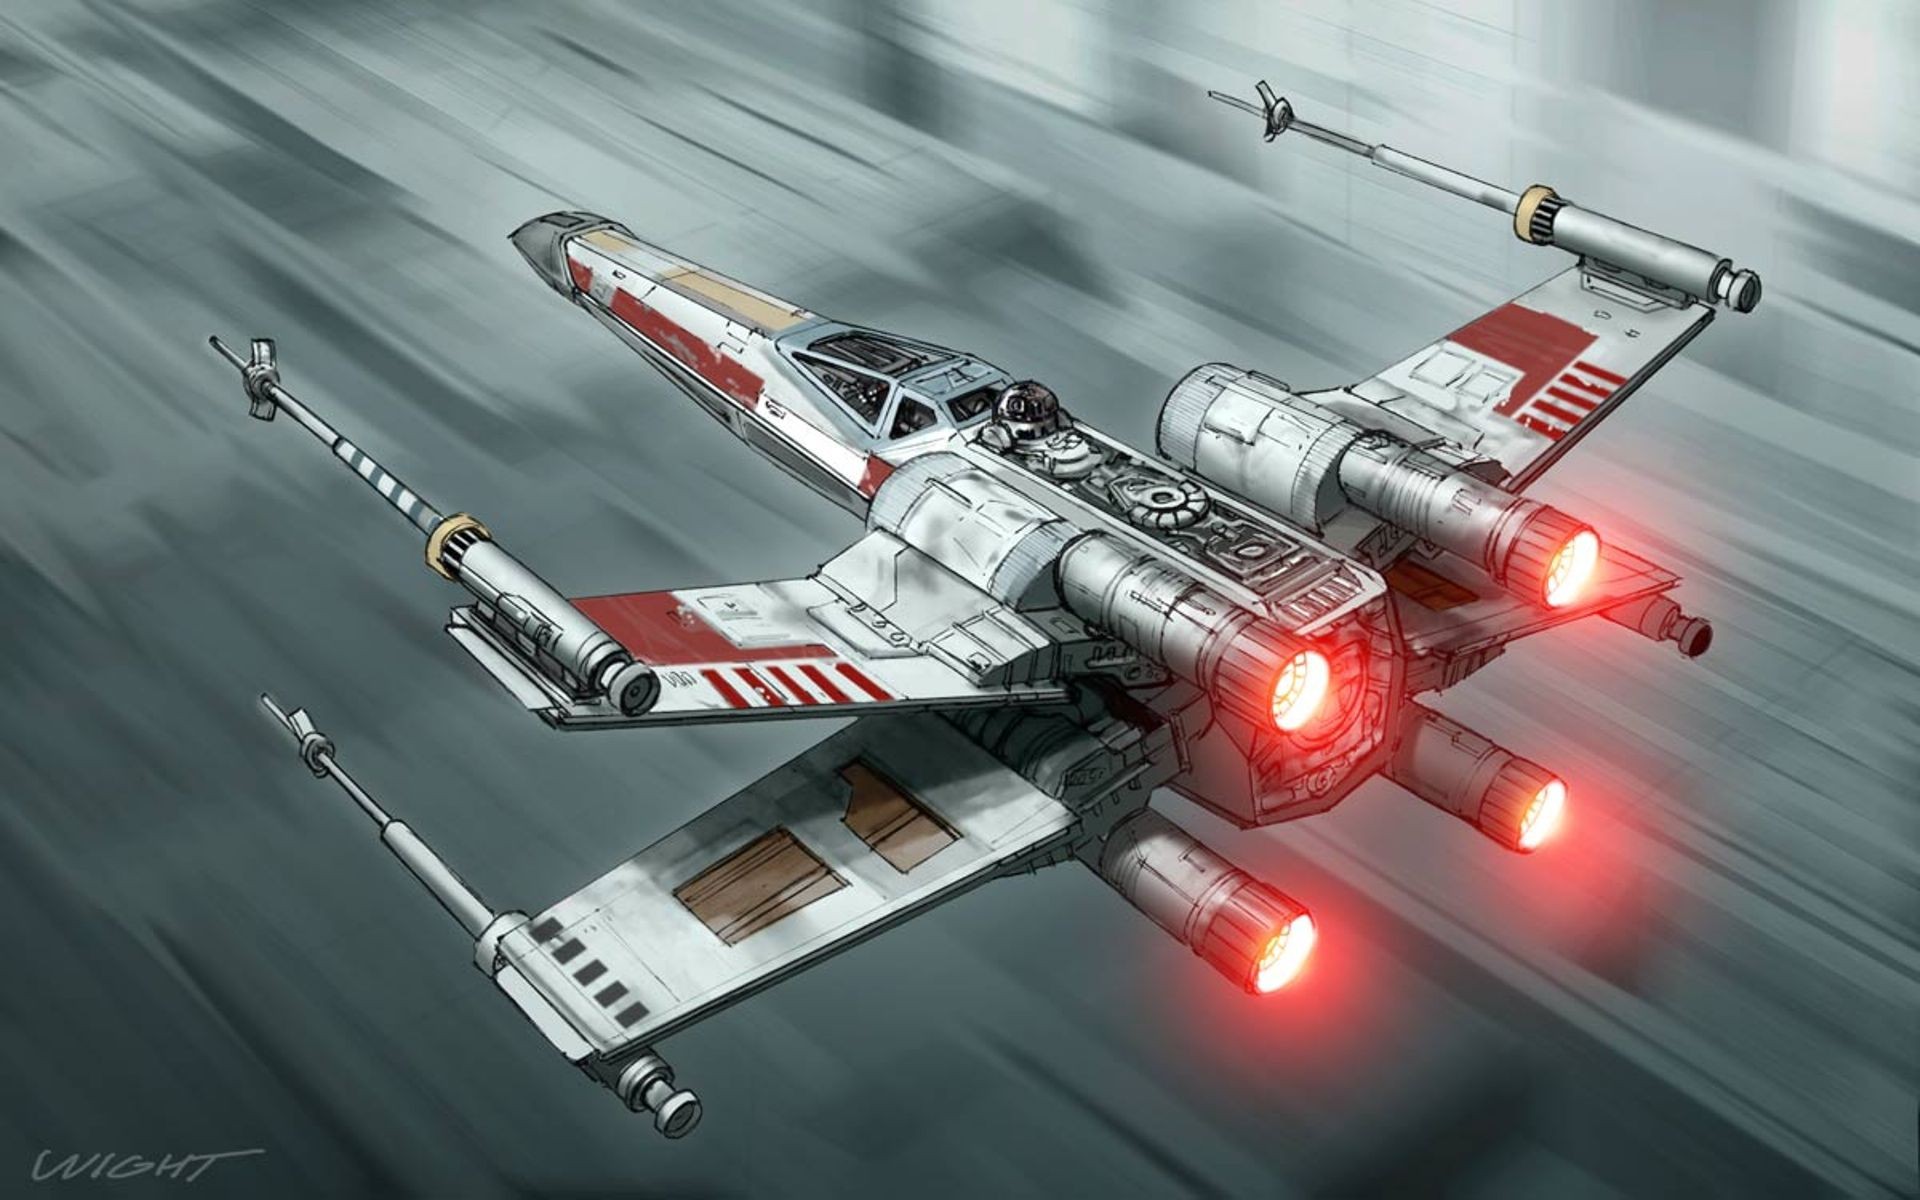 Abrams Unveils The X Wing For Star Wars Episode Vii